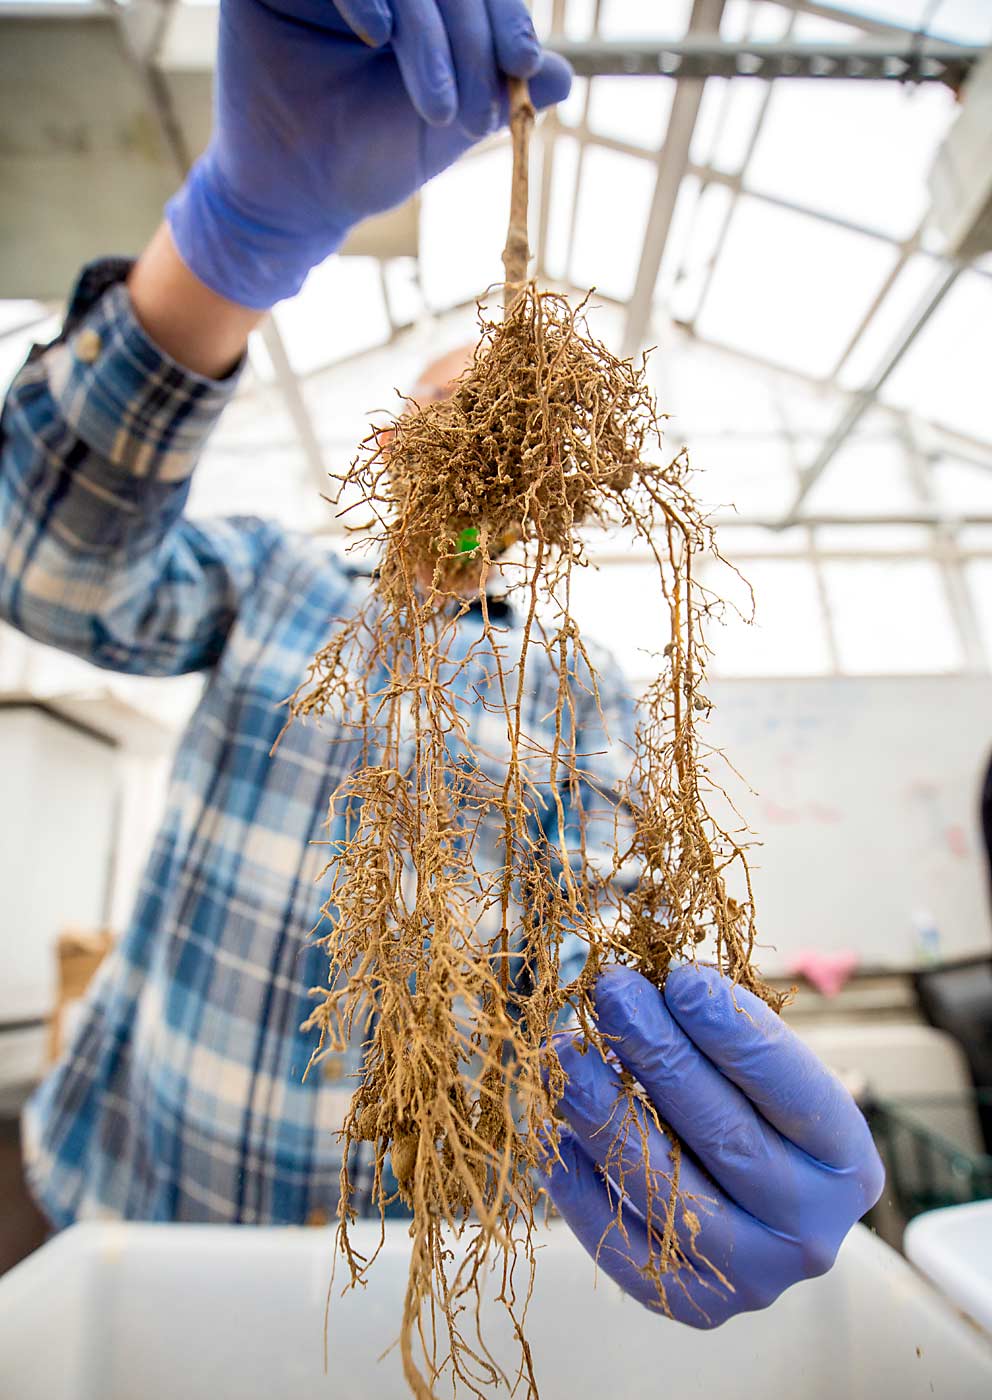 Washington State University lab technician Rylan Hull delicately removes one of the vine root systems to measure the effects of mycorrhizae amendments on plant growth and nutrient uptake. (TJ Mullinax/Good Fruit Grower)